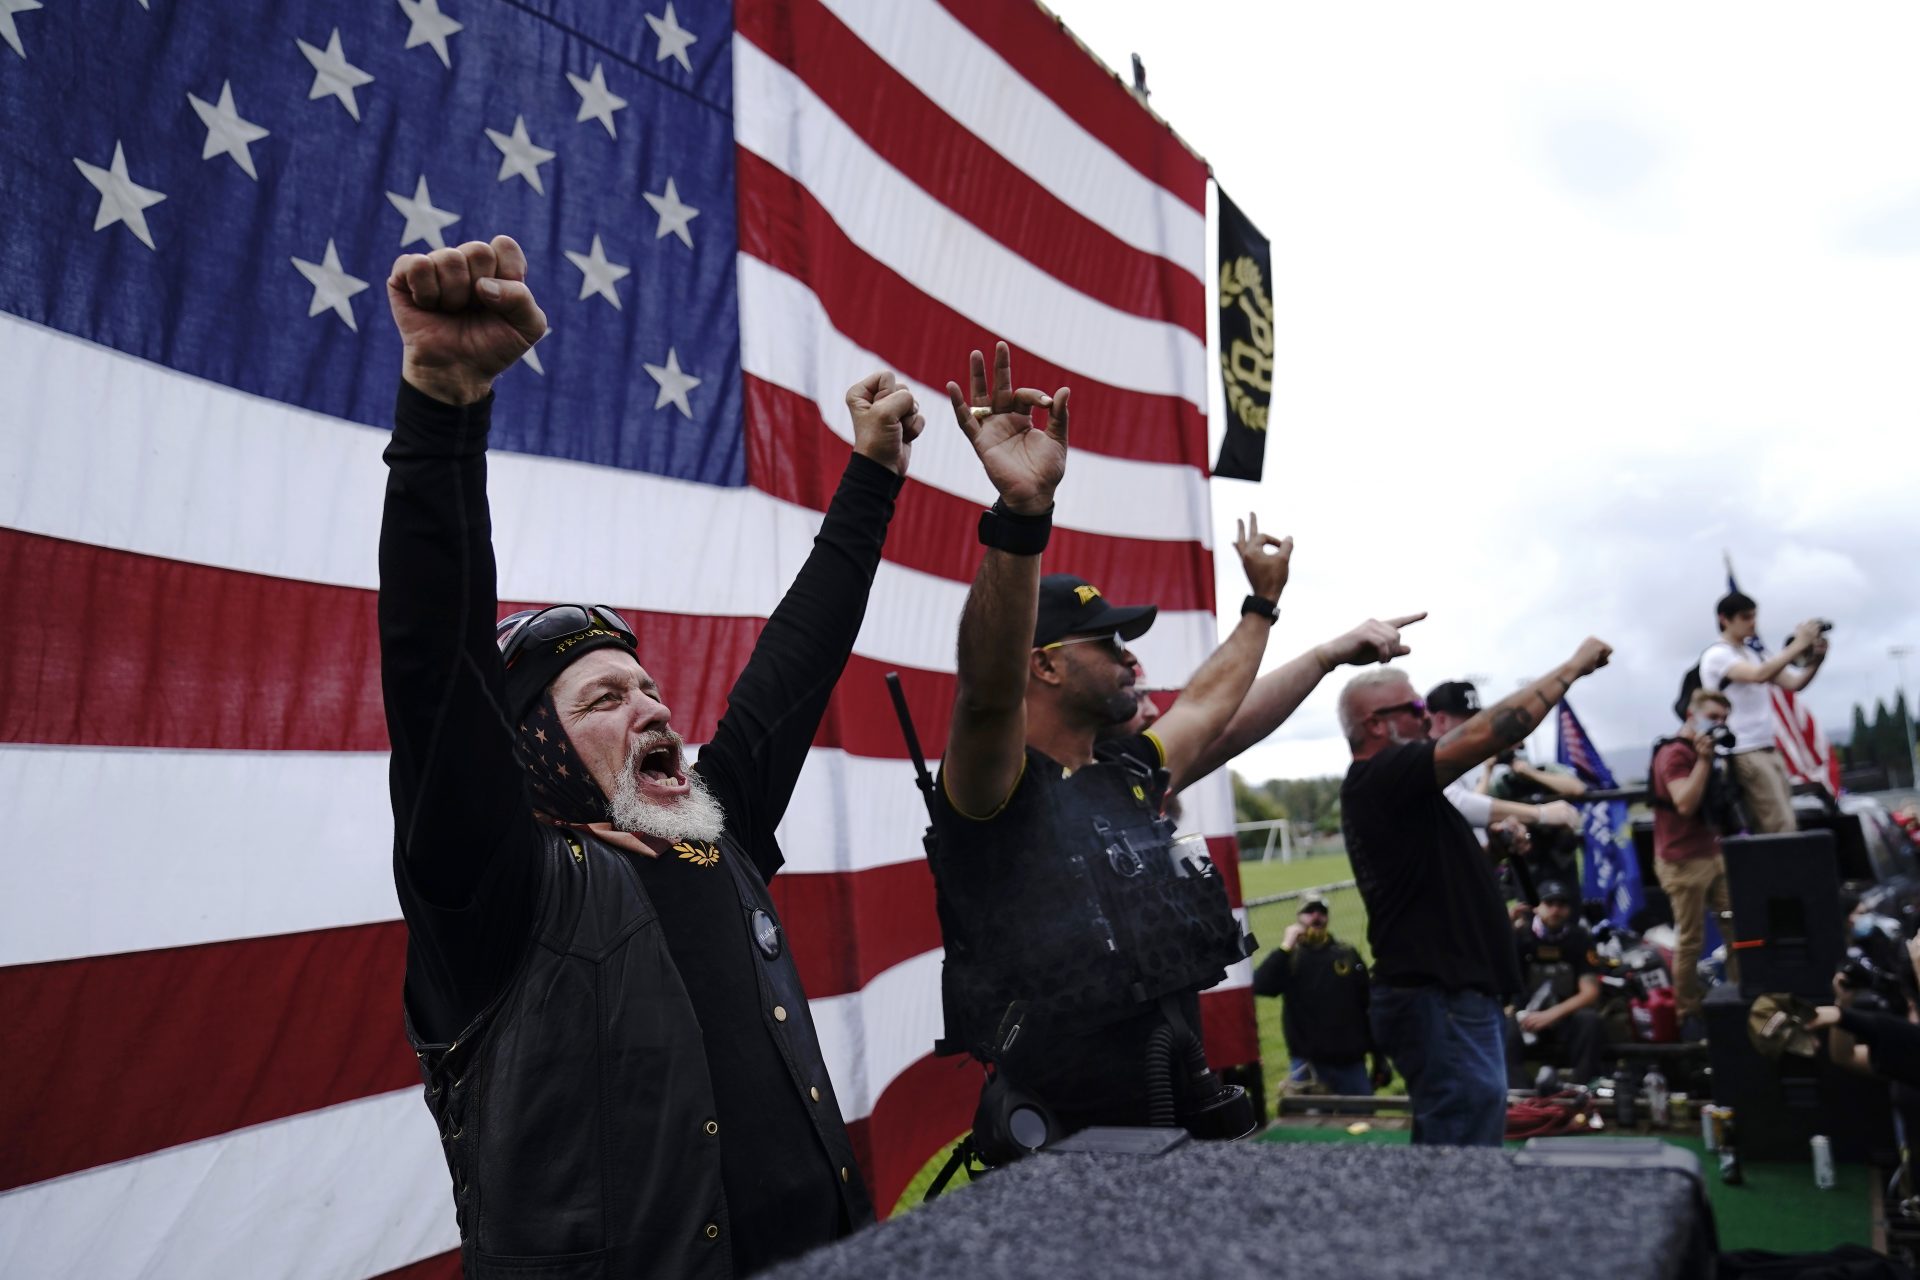 Conspiracy charges bring Proud Boys’ history of violence into spotlight ...